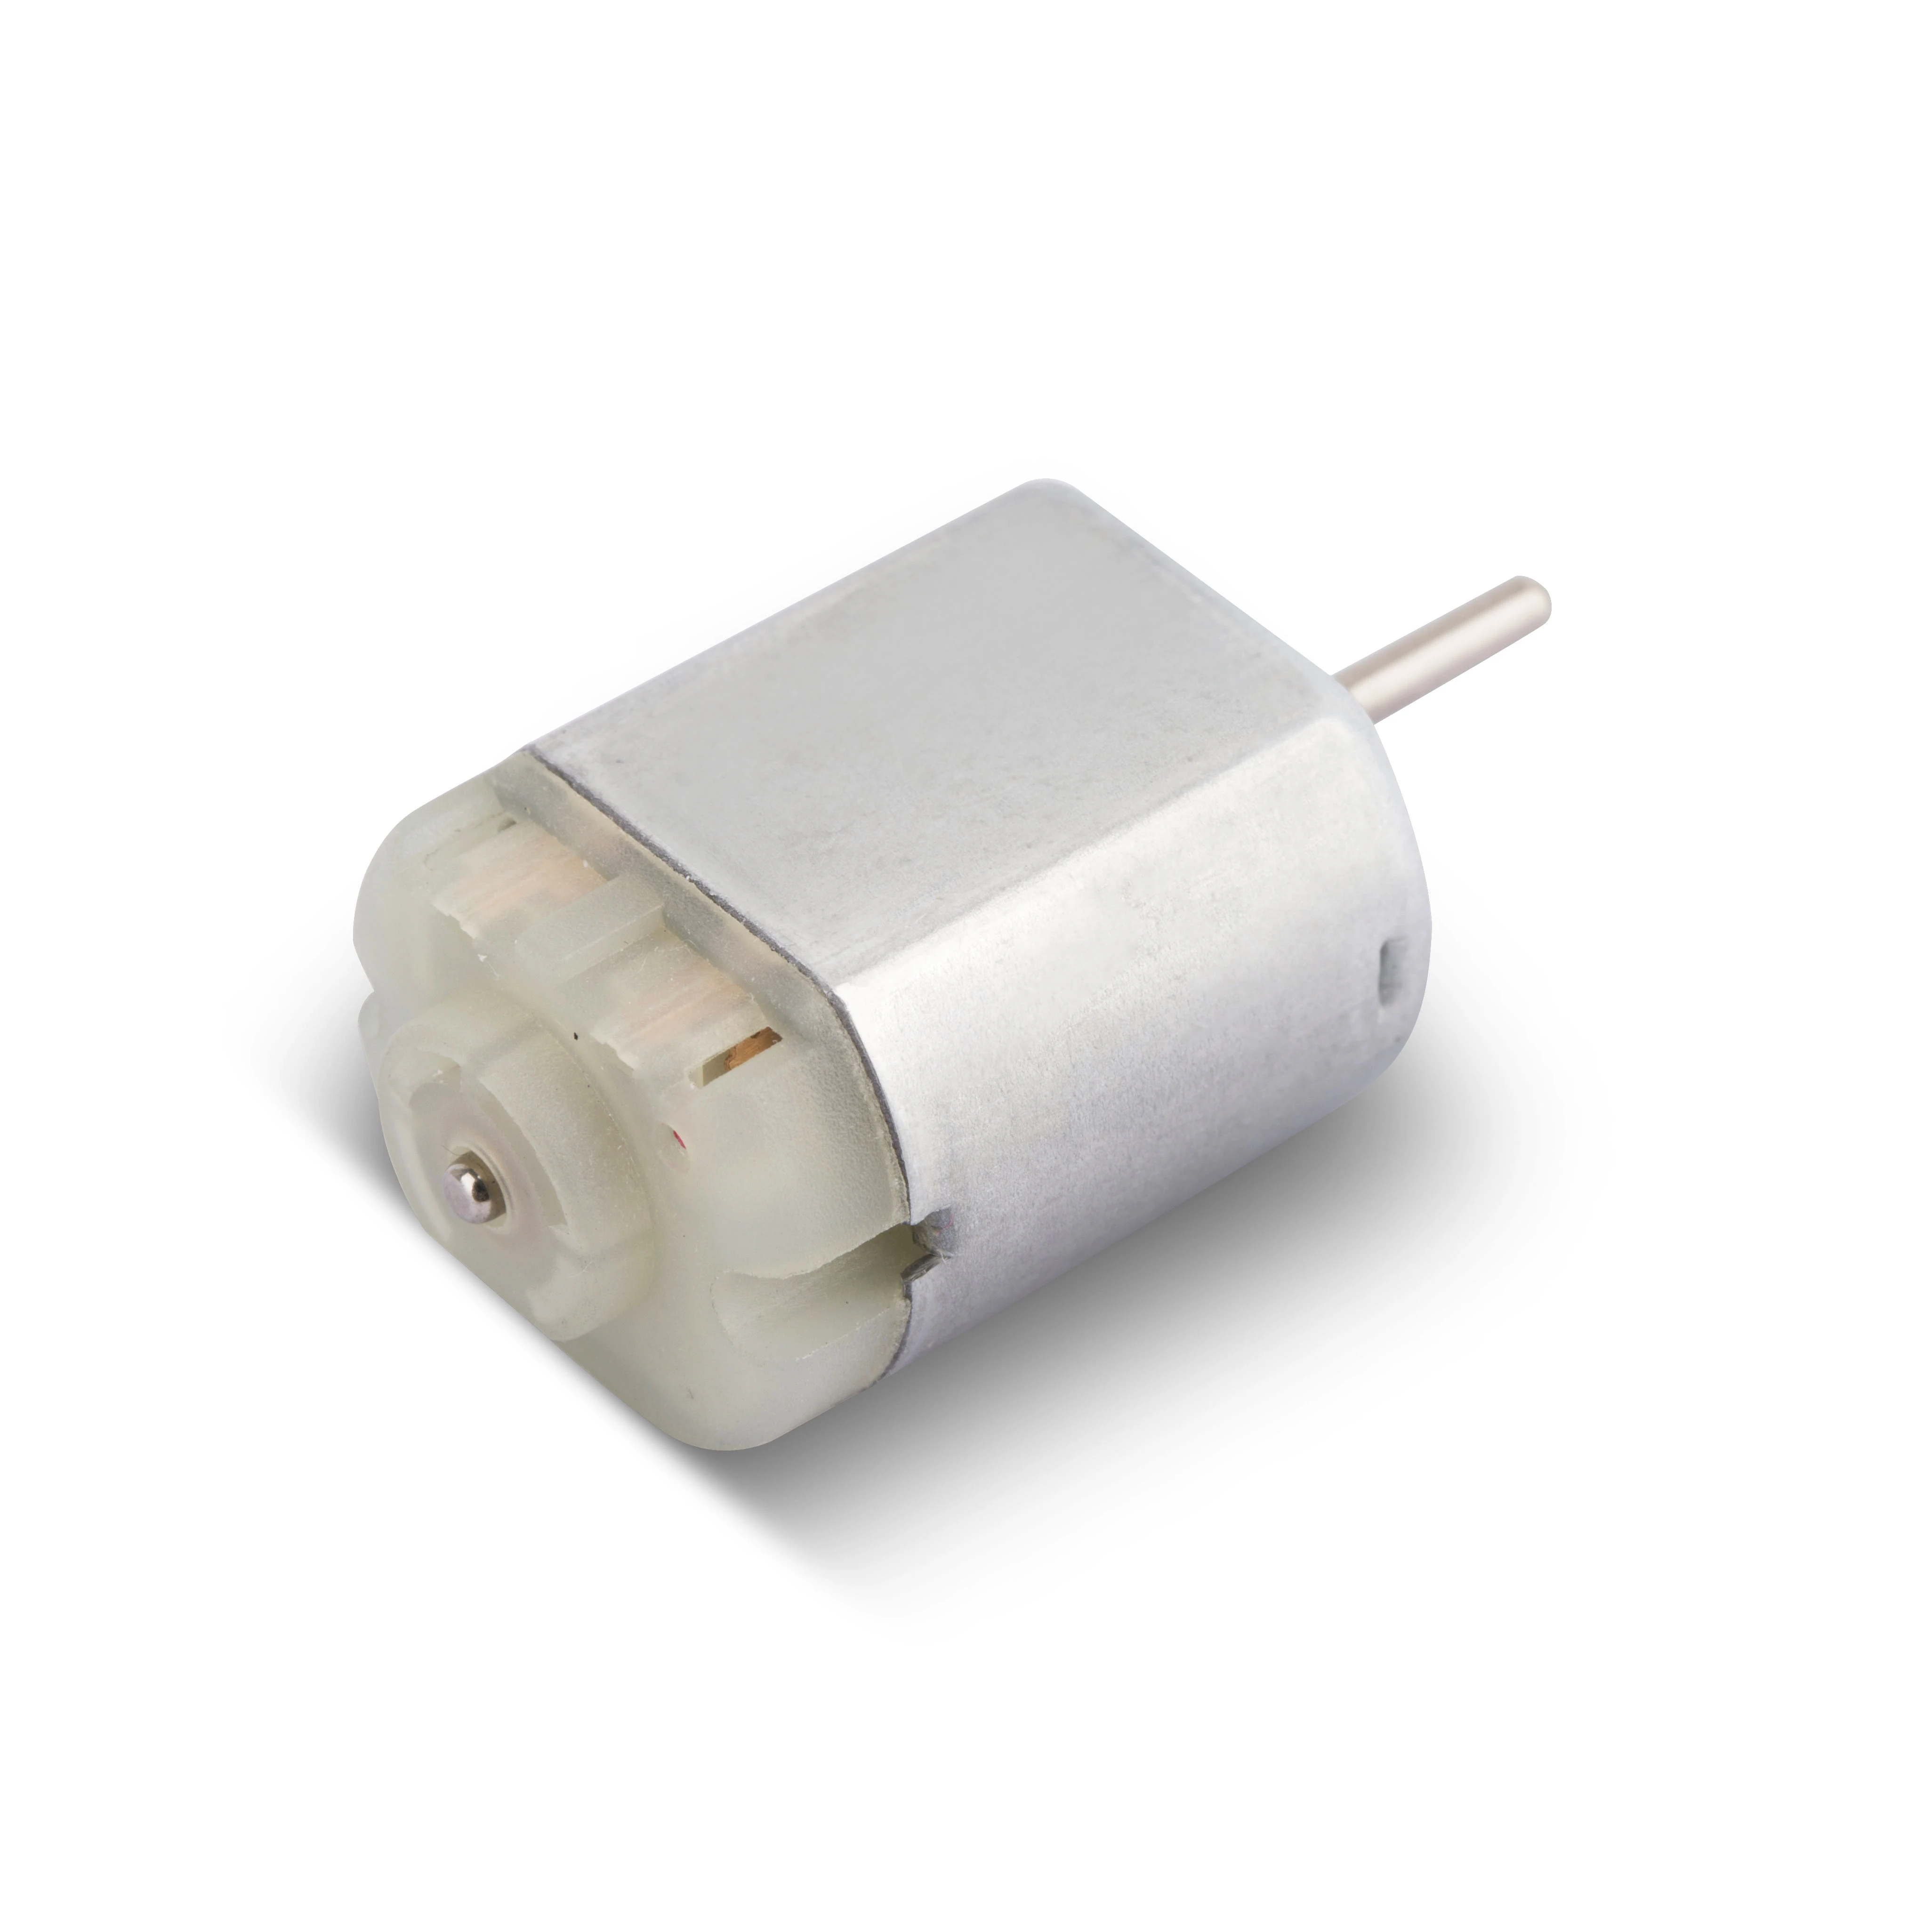 DC Motor 12V High Speed Dual Shaft For Toy Car